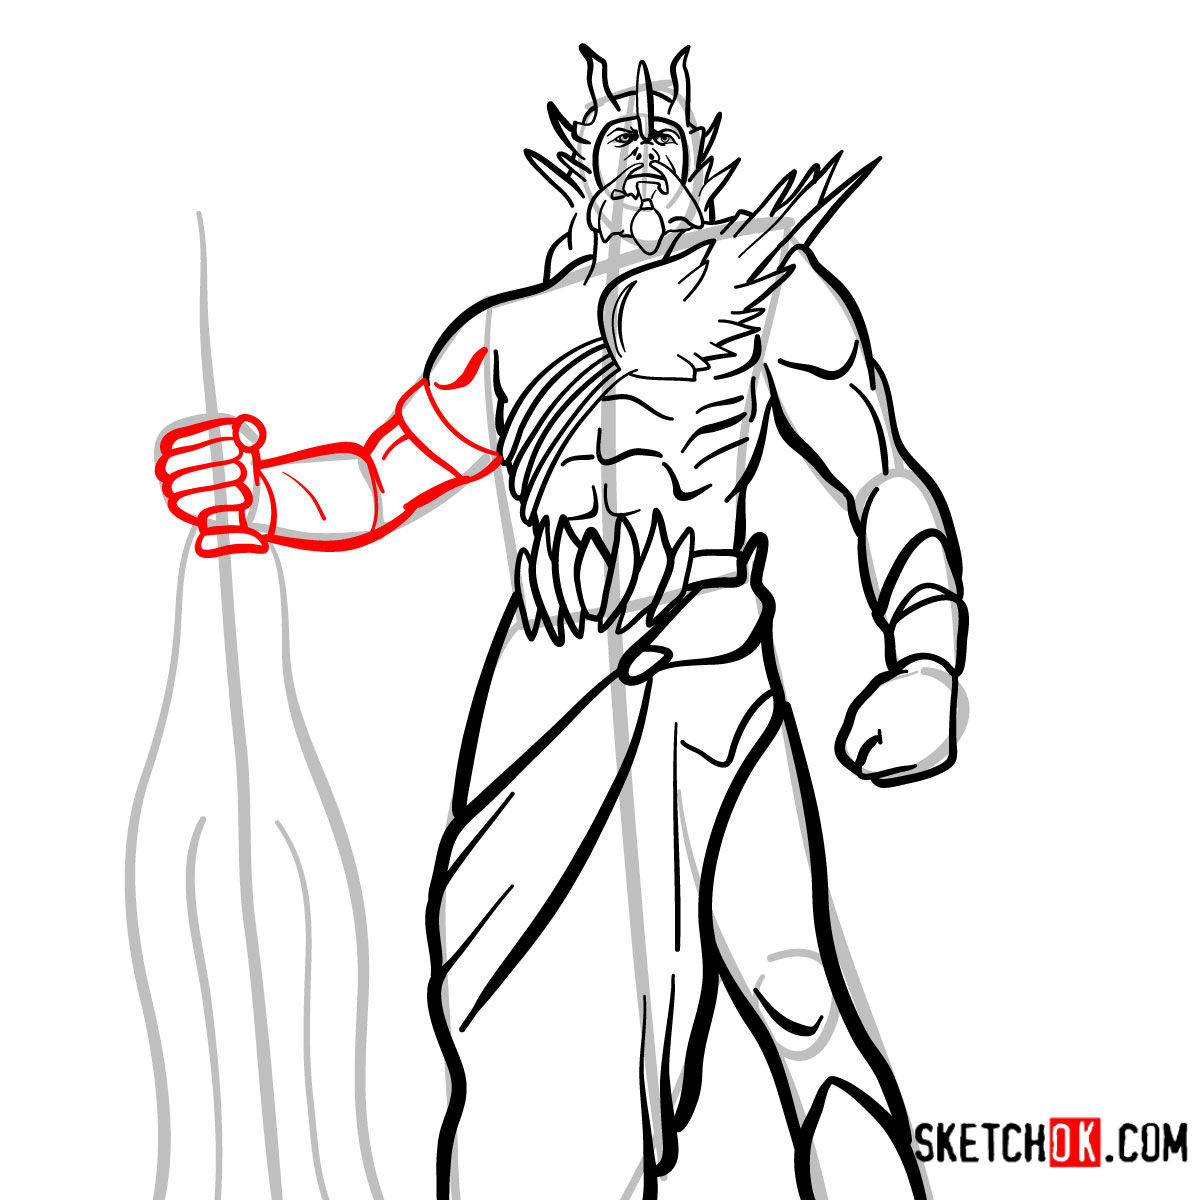 Step-by-step drawing guide of Poseidon.